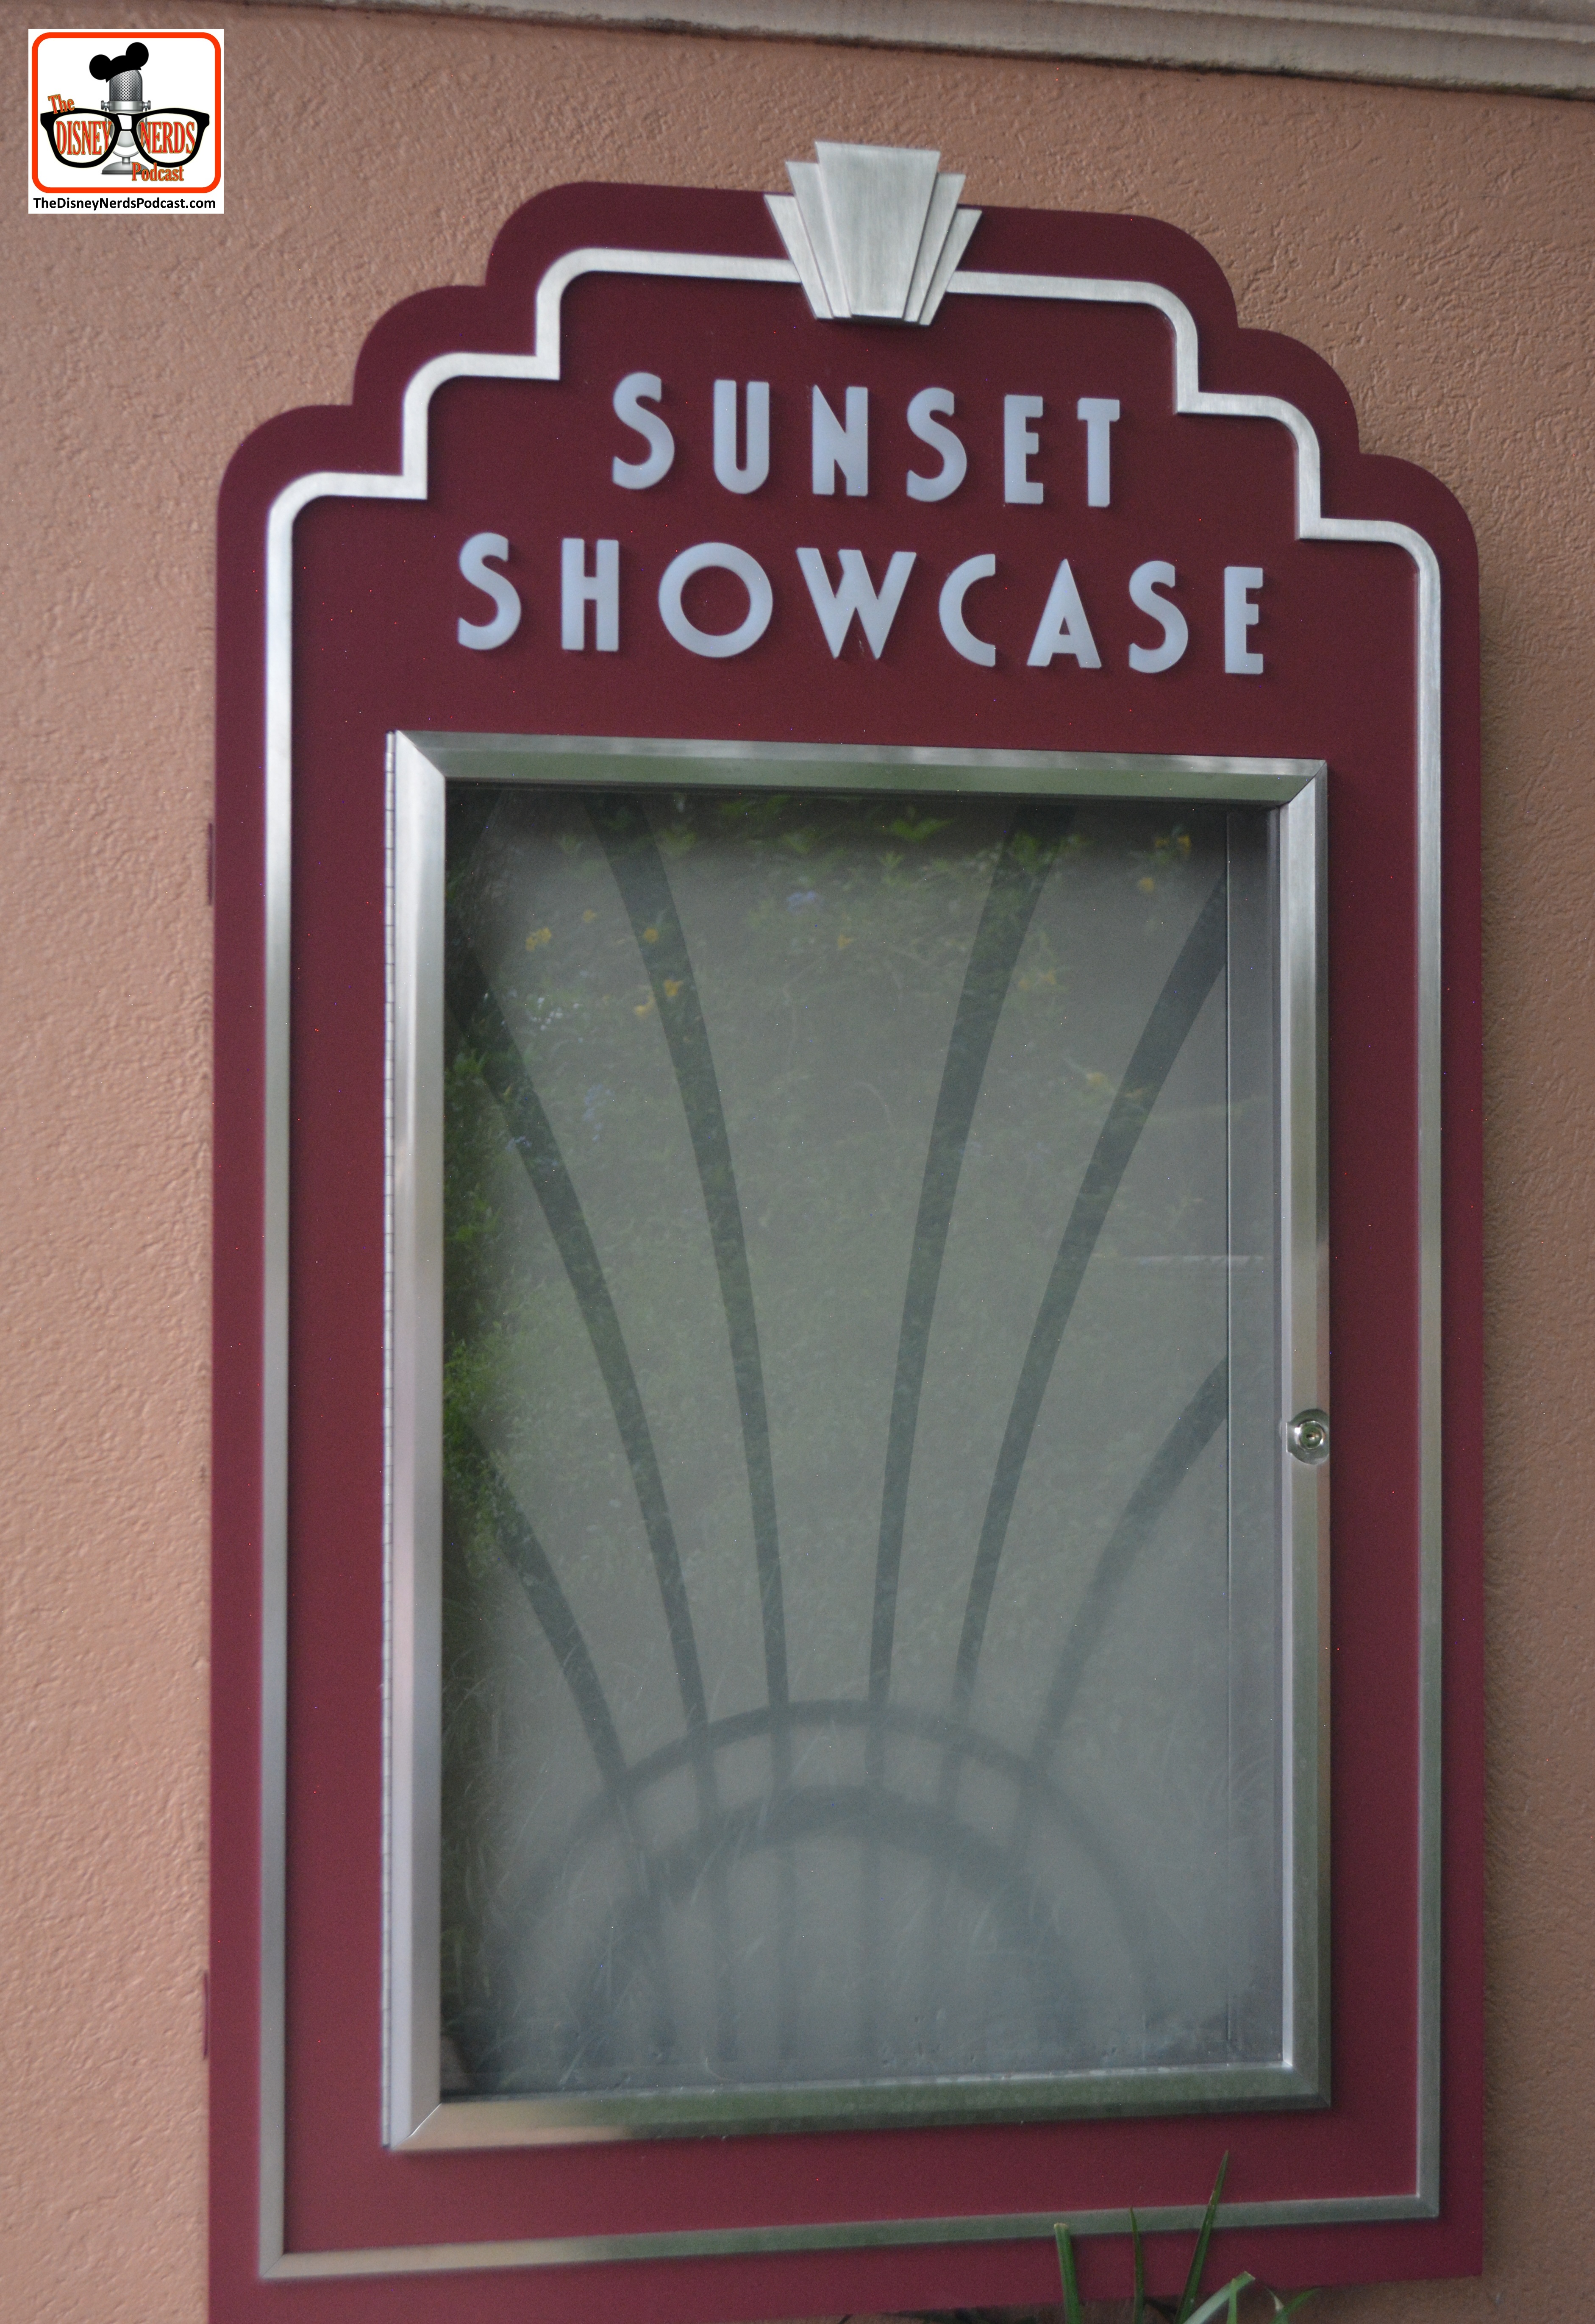 The Sunset Showcase is ready to open any day... this is hanging near the rock and roller coaster